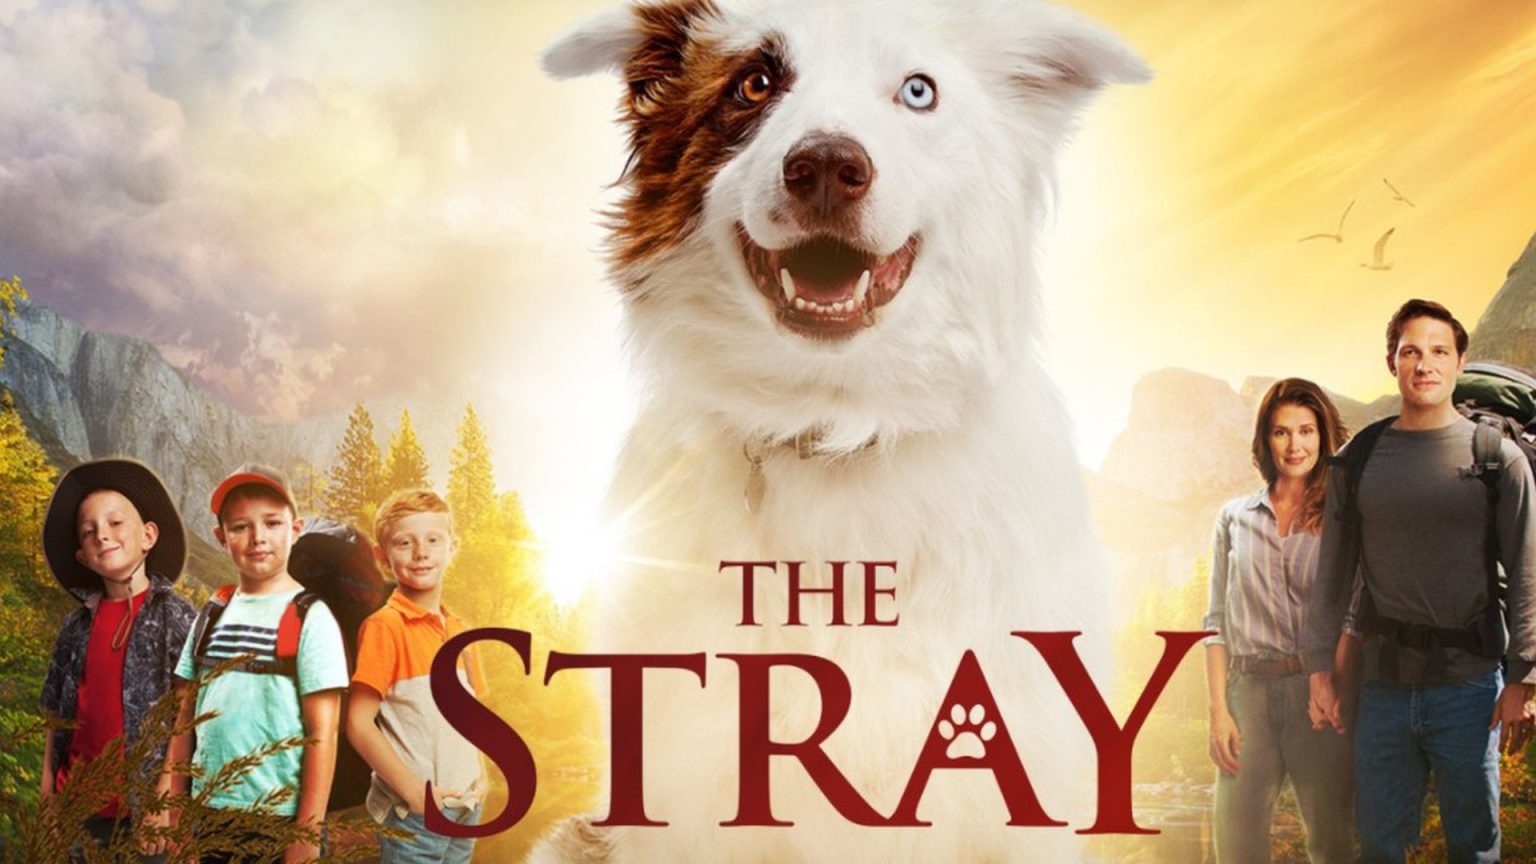 In need of a mood lifter? Watch these heartwarming films about animals!